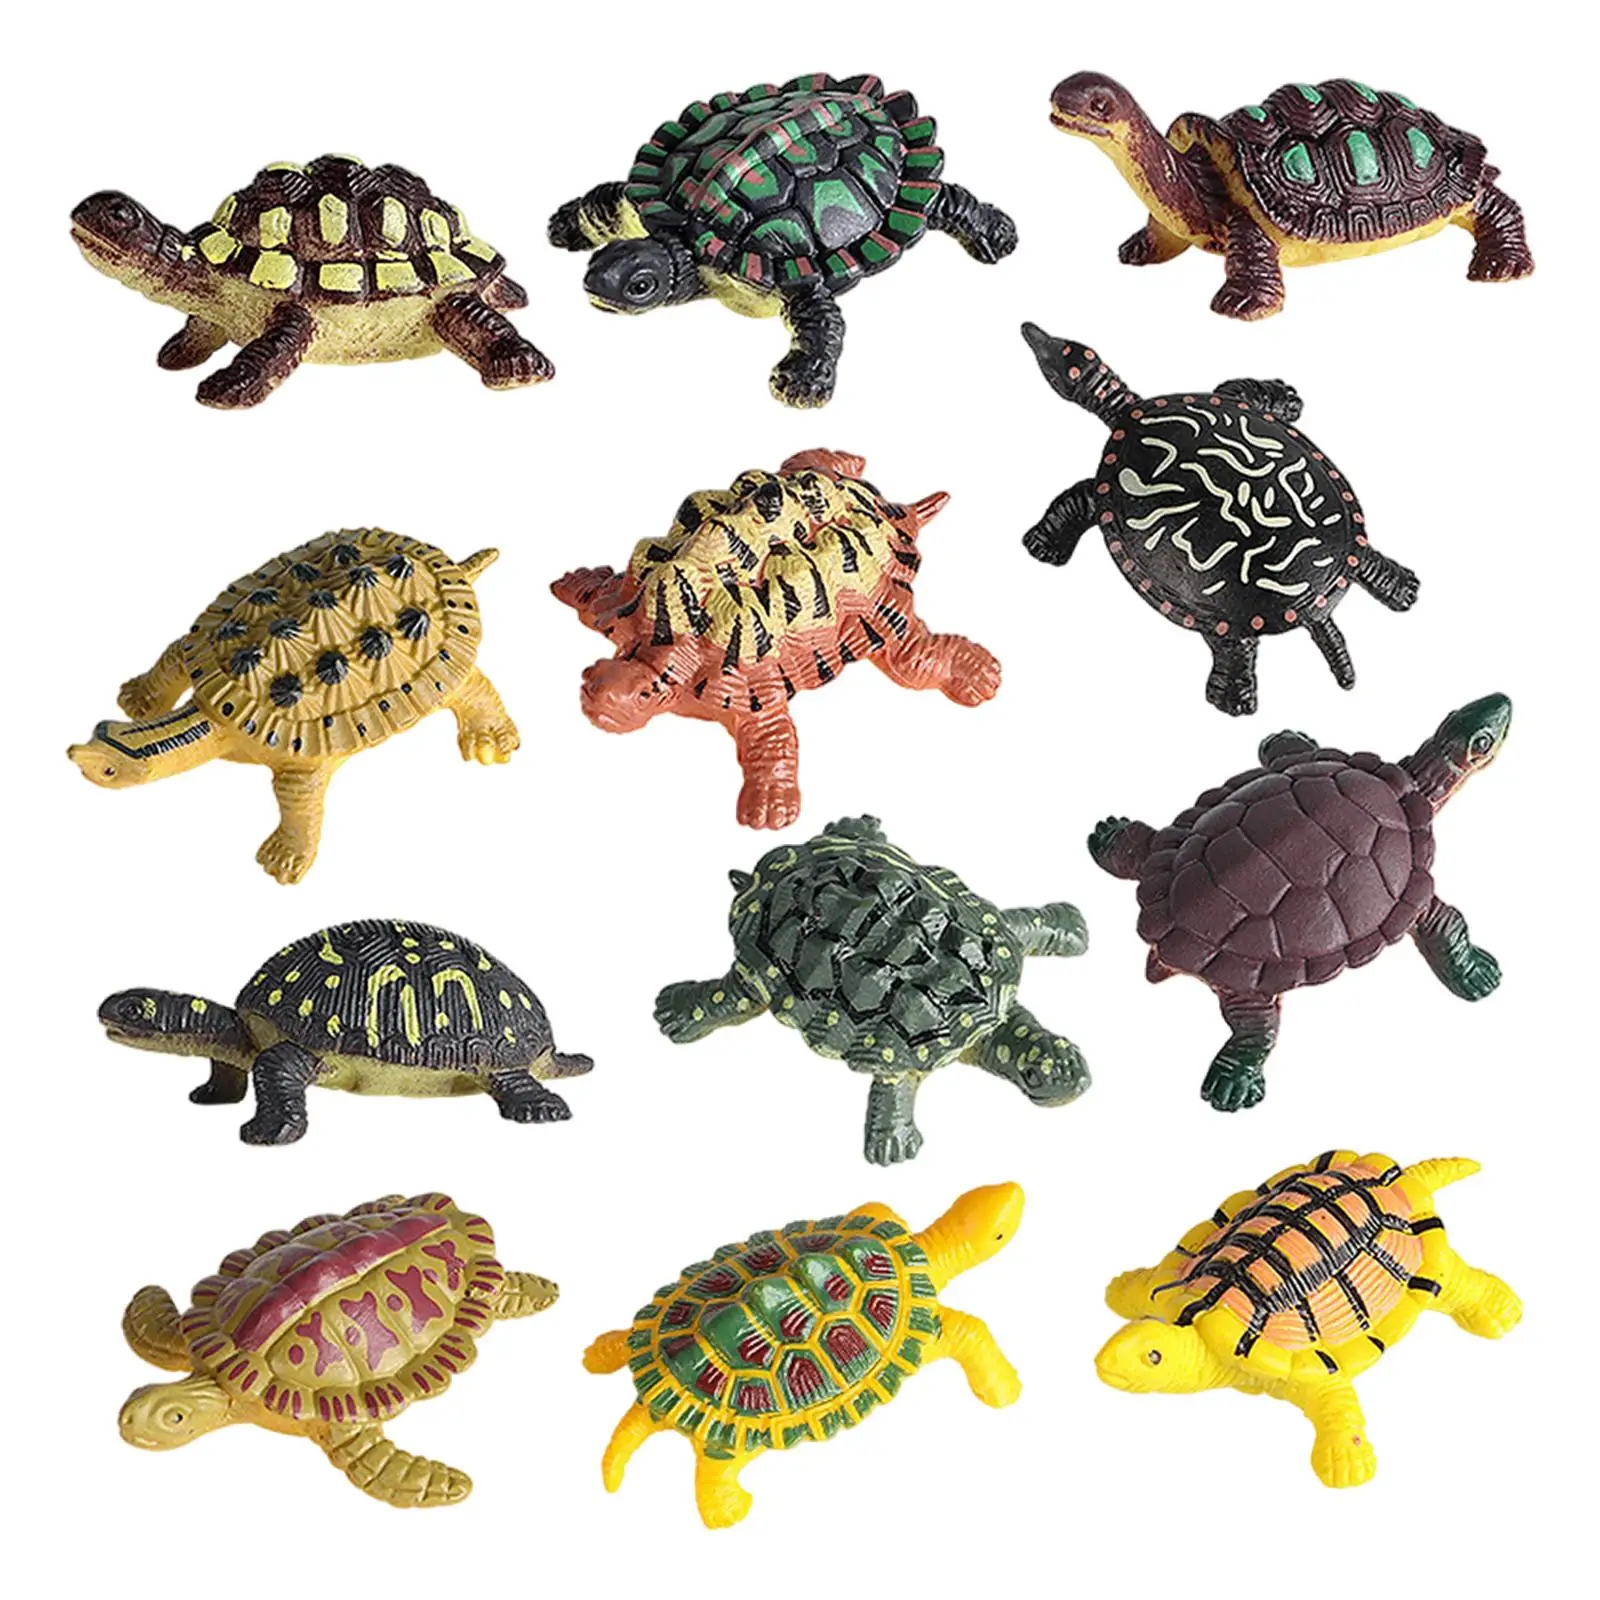 12x  Animal Turtle Series Model Figures Collection Educational Toy